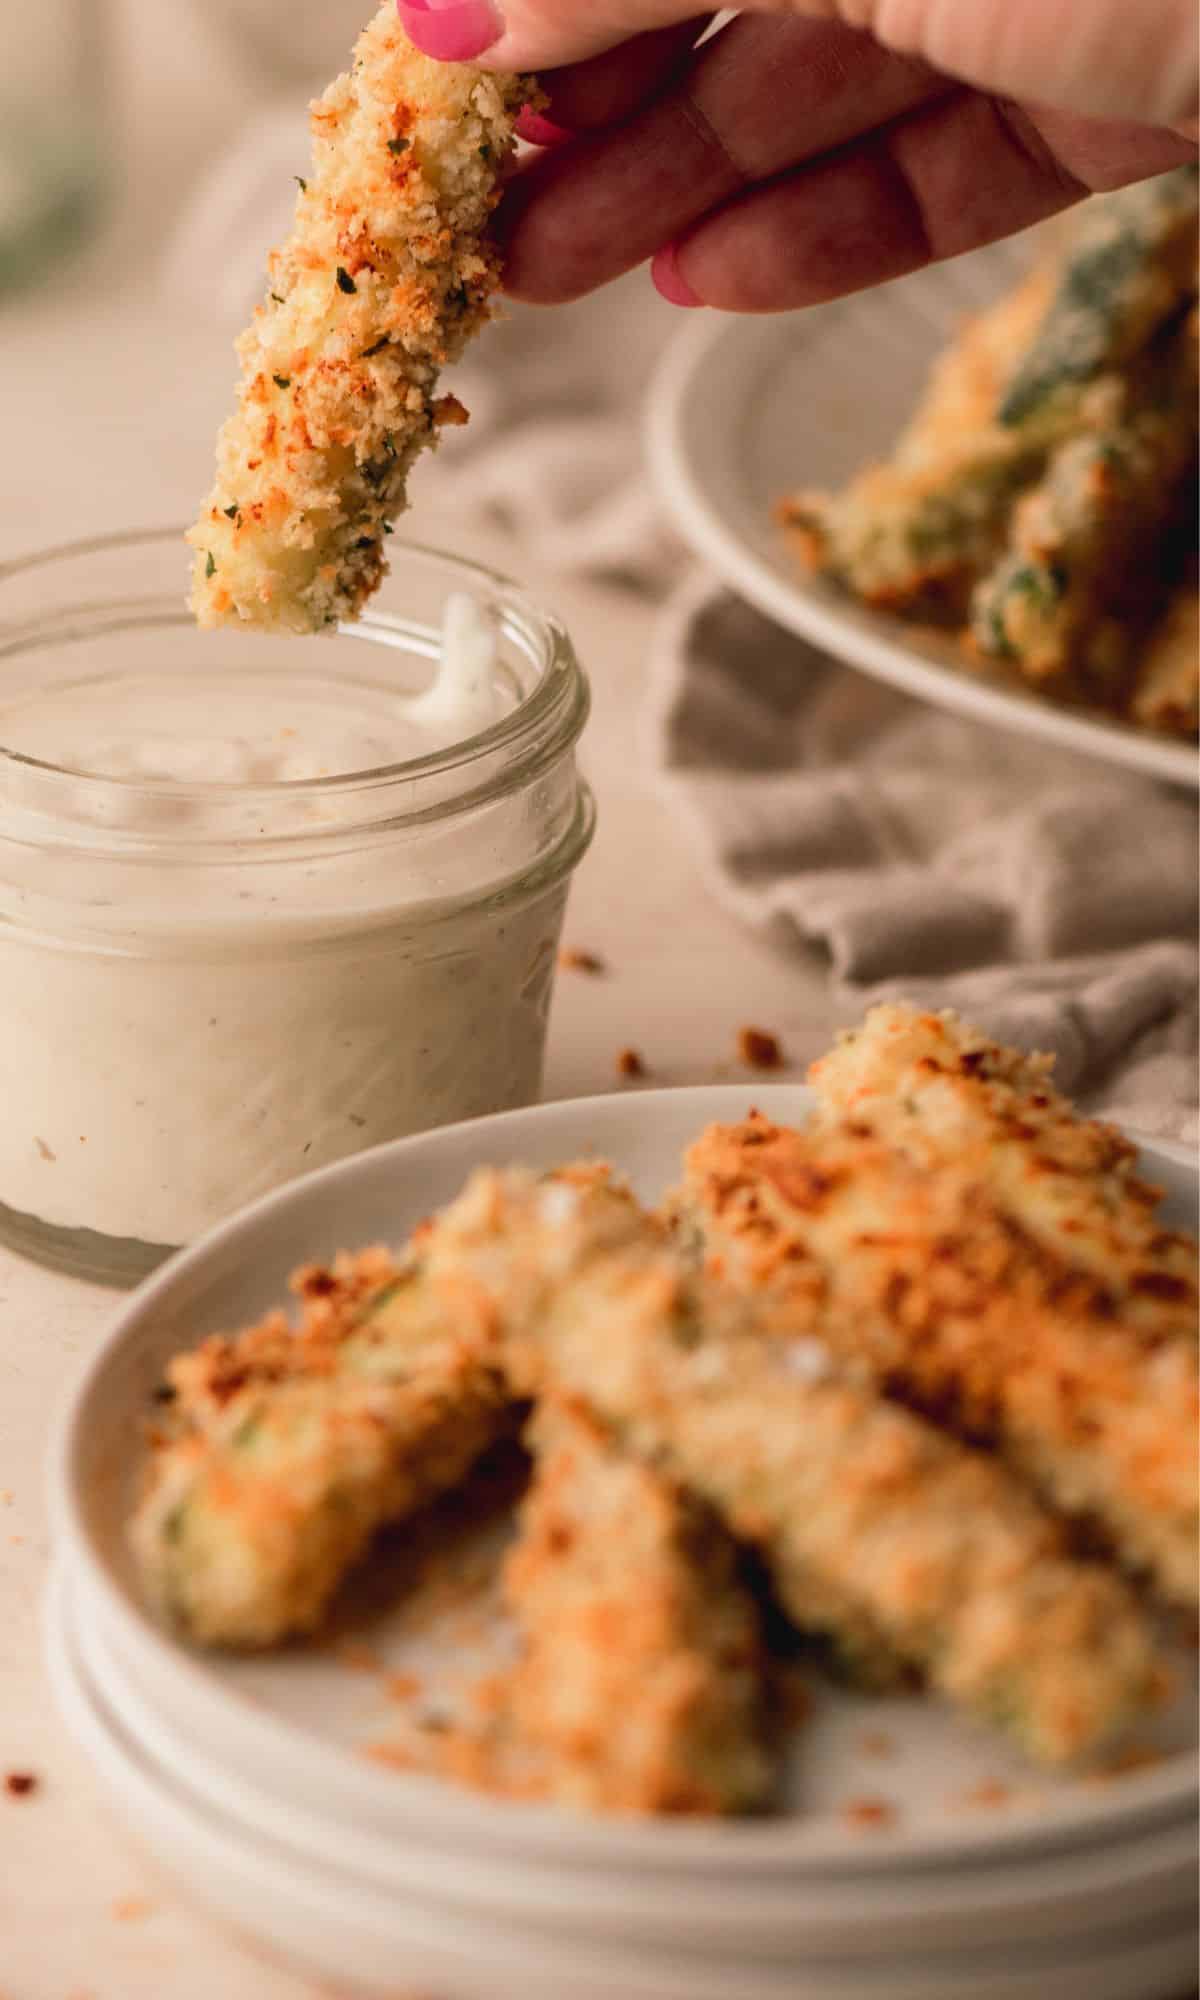 Zucchini fry getting dipped in ranch dressing.